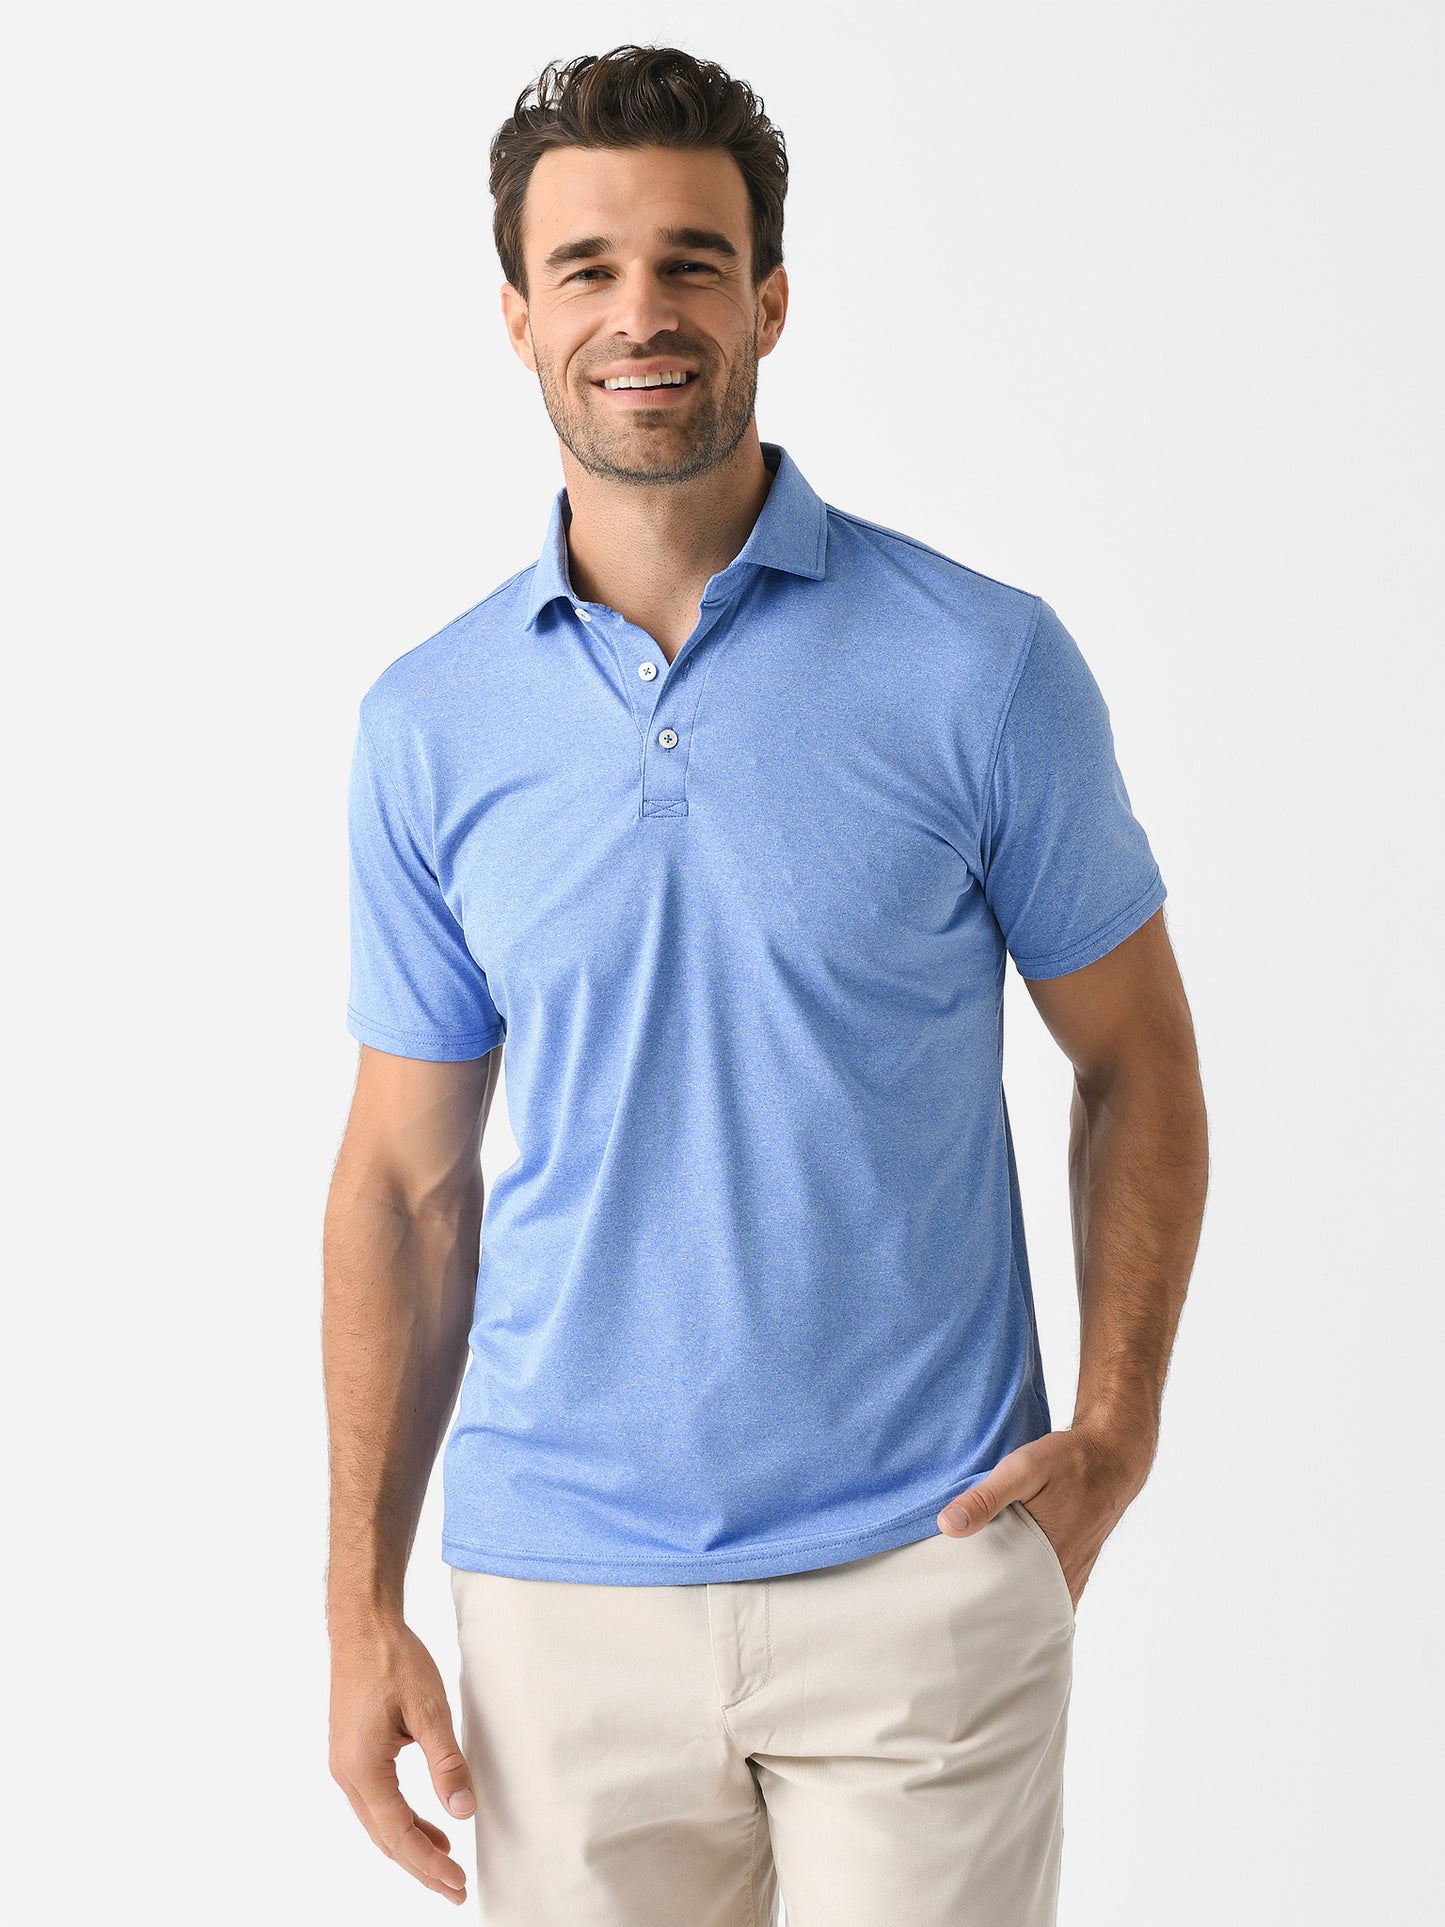 Holderness + Bourne Men's The Anderson Polo